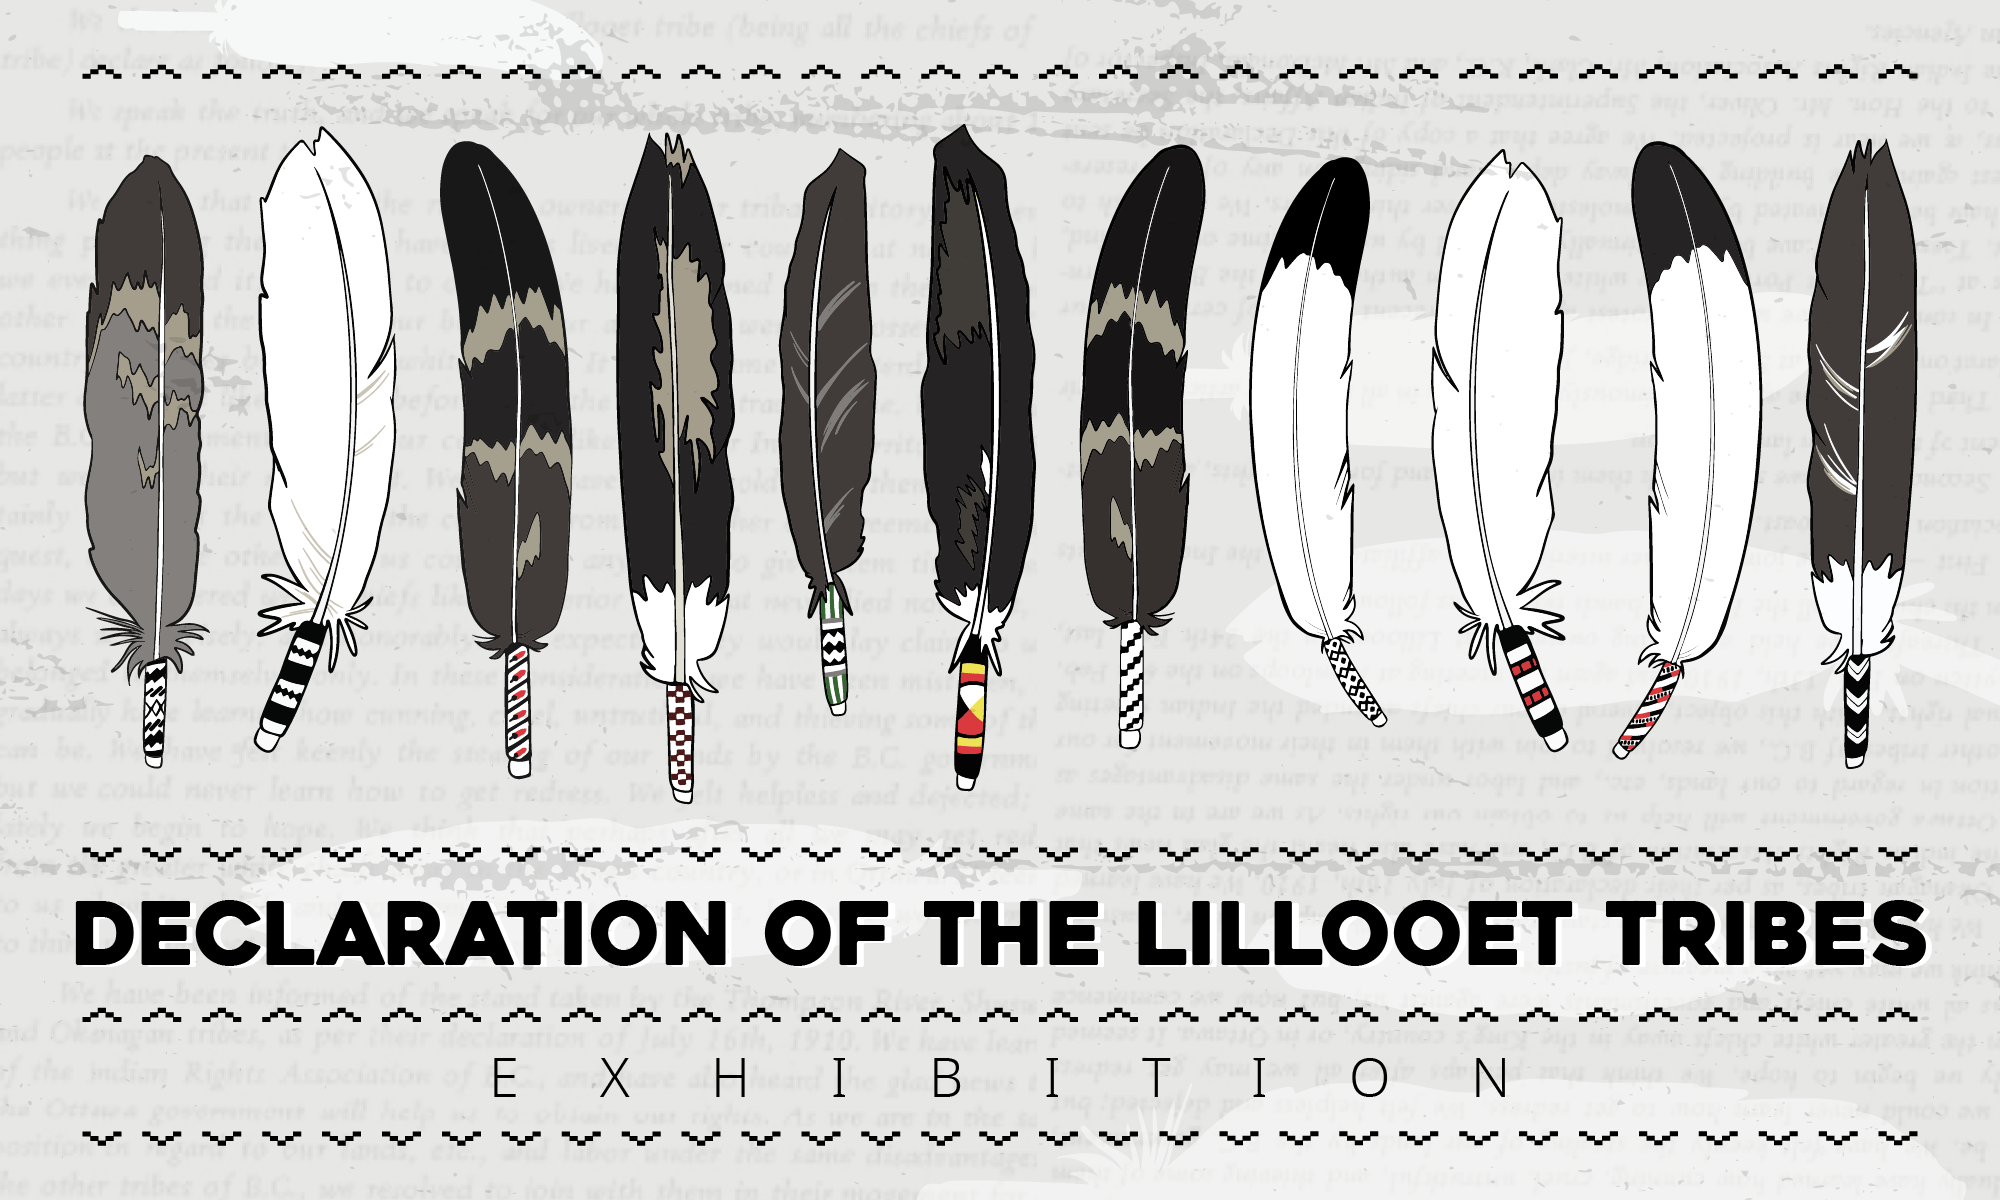 Declaration of the Lillooet Tribes Exhibition